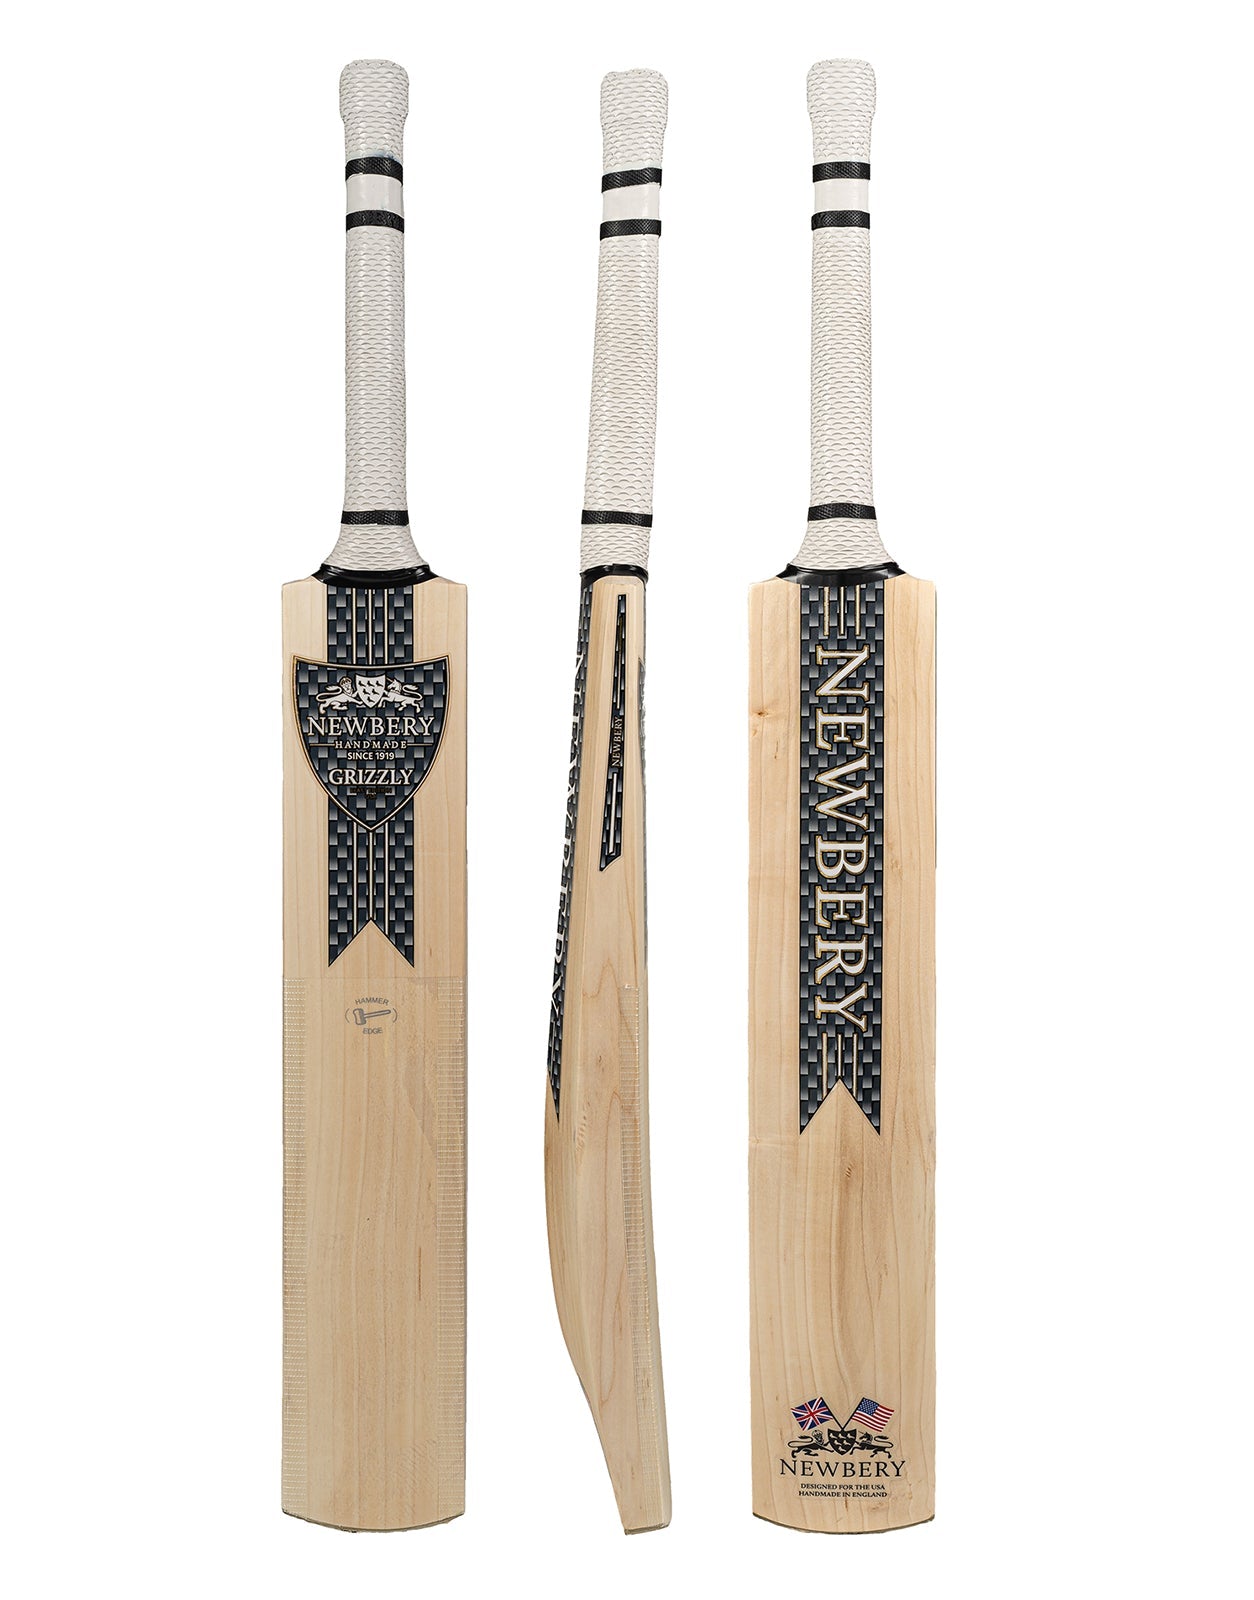 Newbery GRIZZLY SPS English Willow Cricket Bat